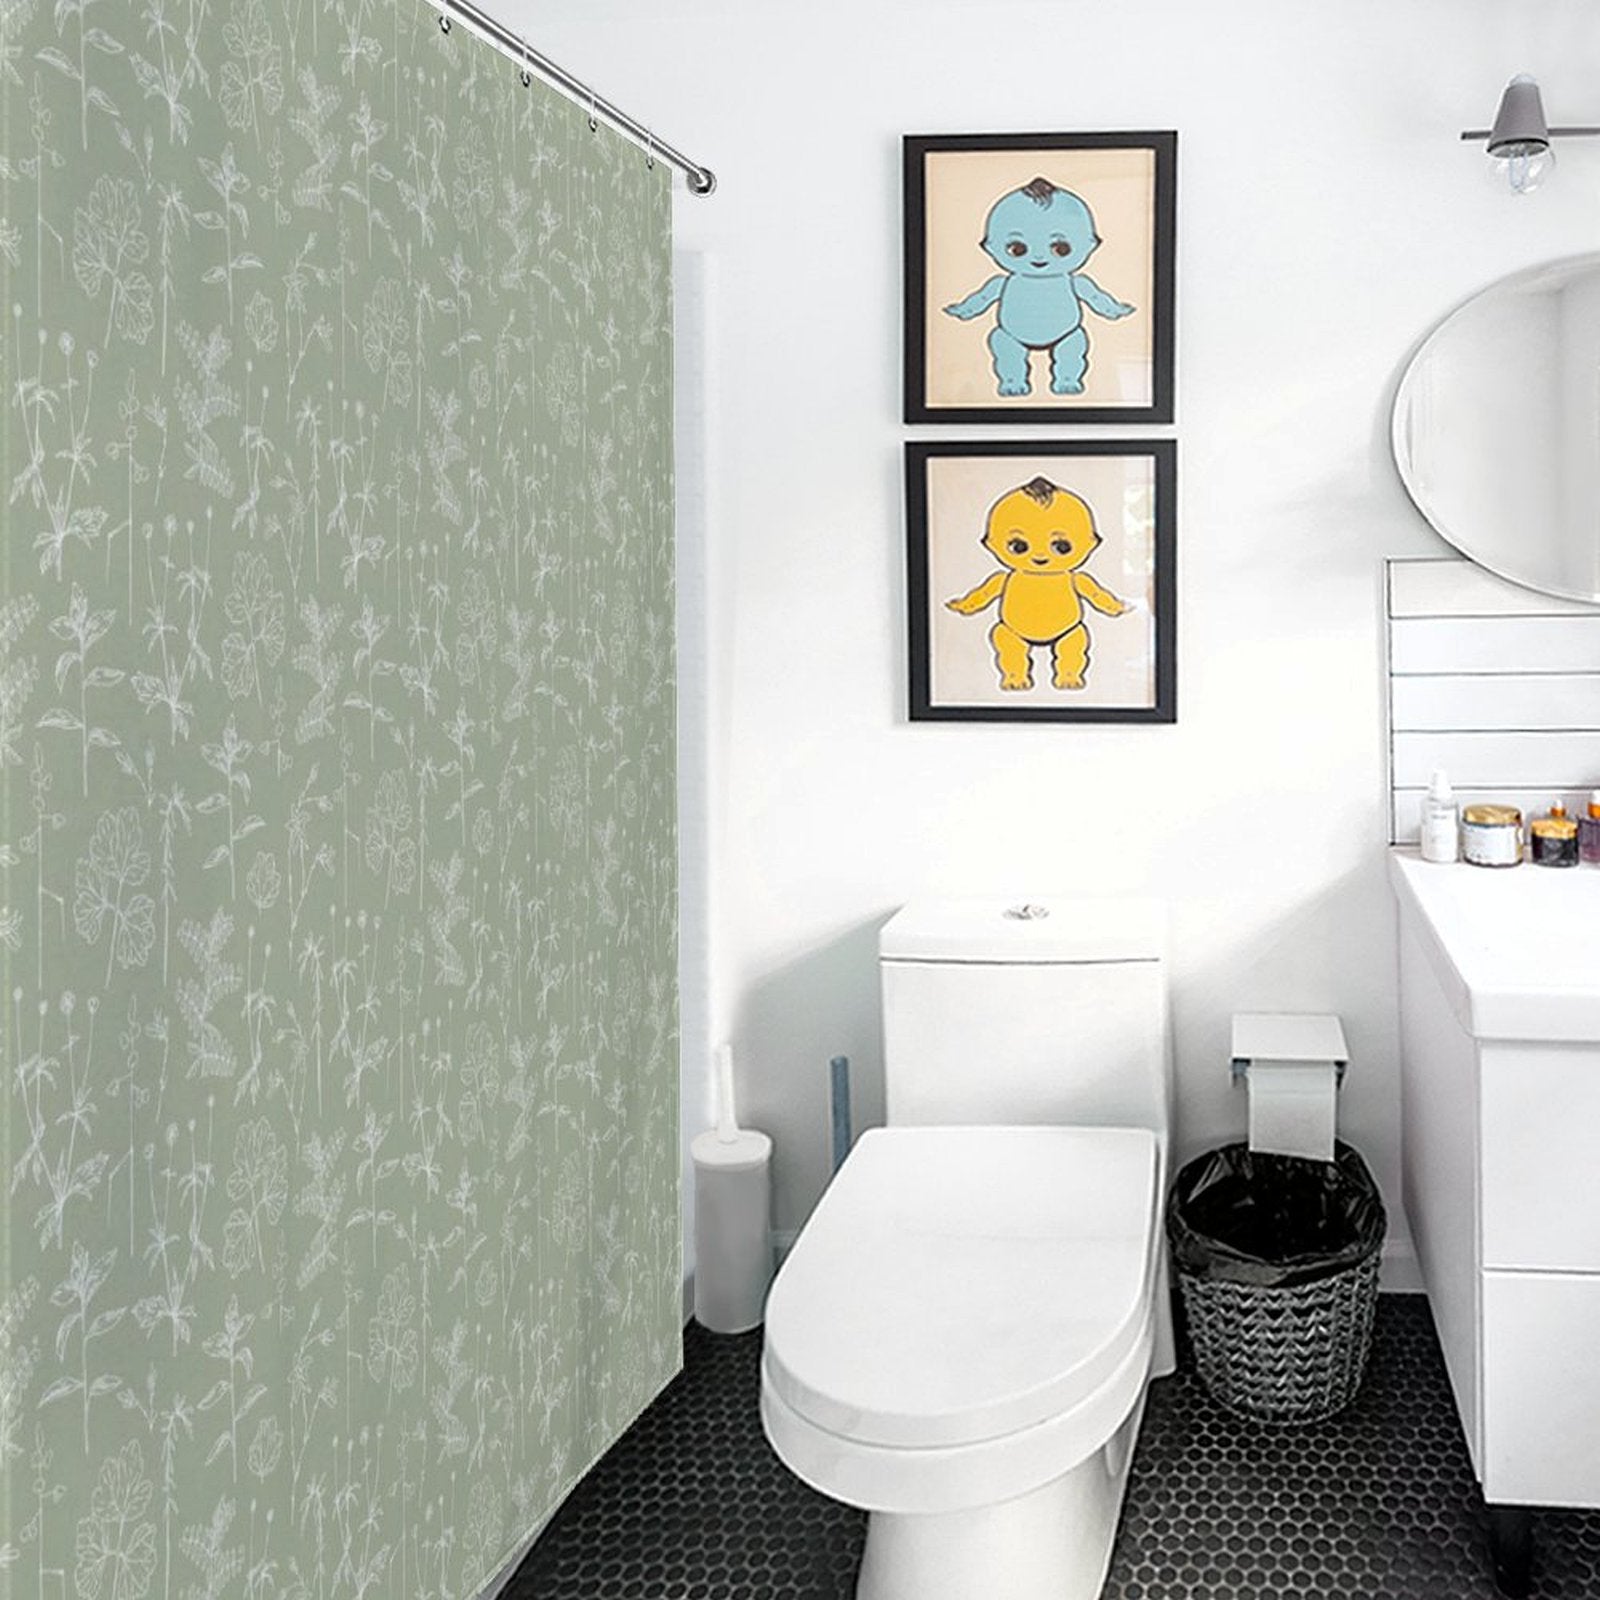 A clean bathroom with a Cotton Cat Boho Retro Sage Green Herbs Flower Shower Curtain showcasing a green floral design, white toilet, black trash can, and white sink. Two framed pictures of cartoon characters hang above the toilet. Round mirror above the sink.